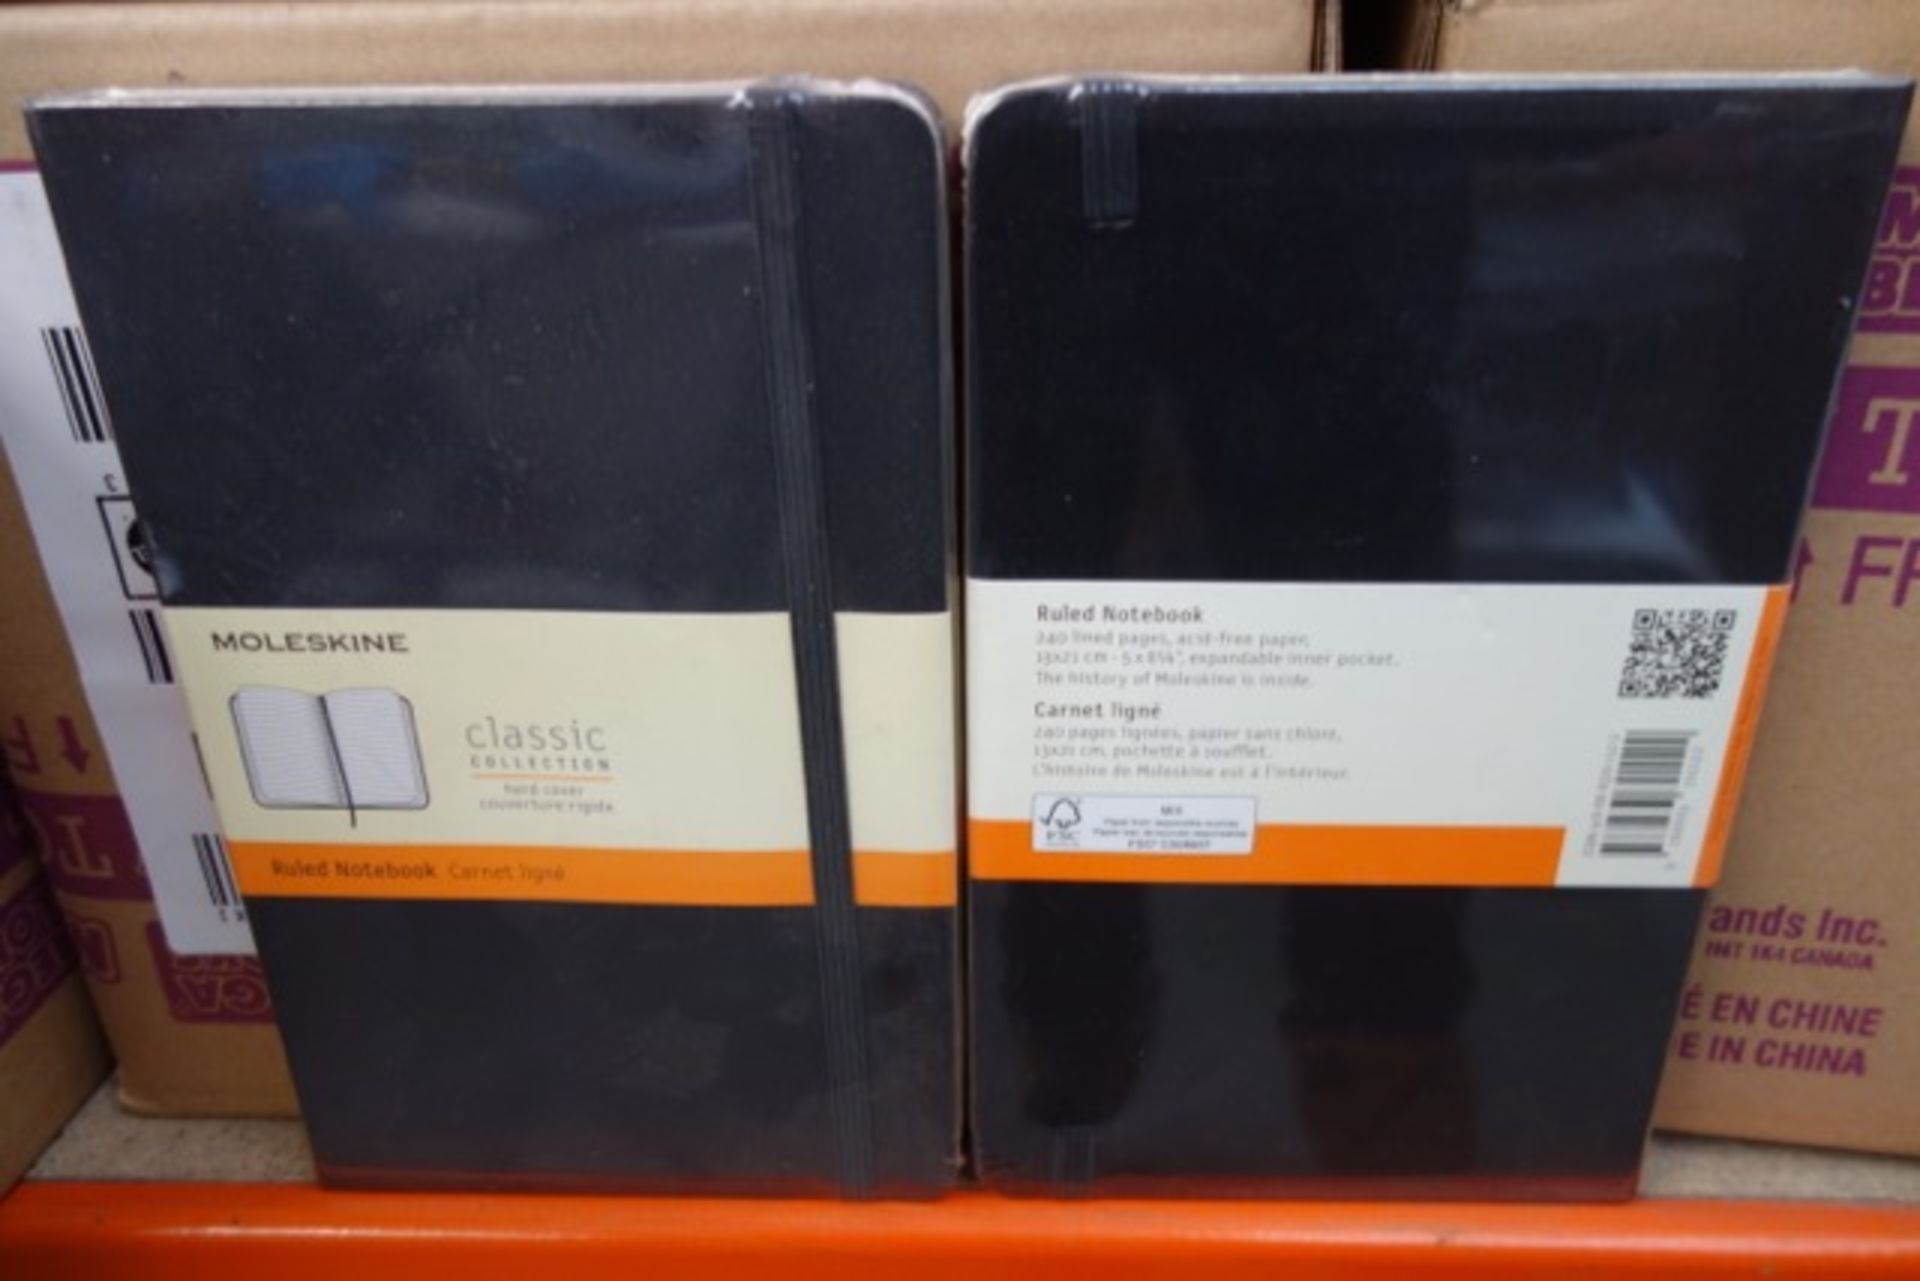 17 x Moleskine Classic Colletion Hard Cover Ruled Notebook. Brand new stock from a major Uk